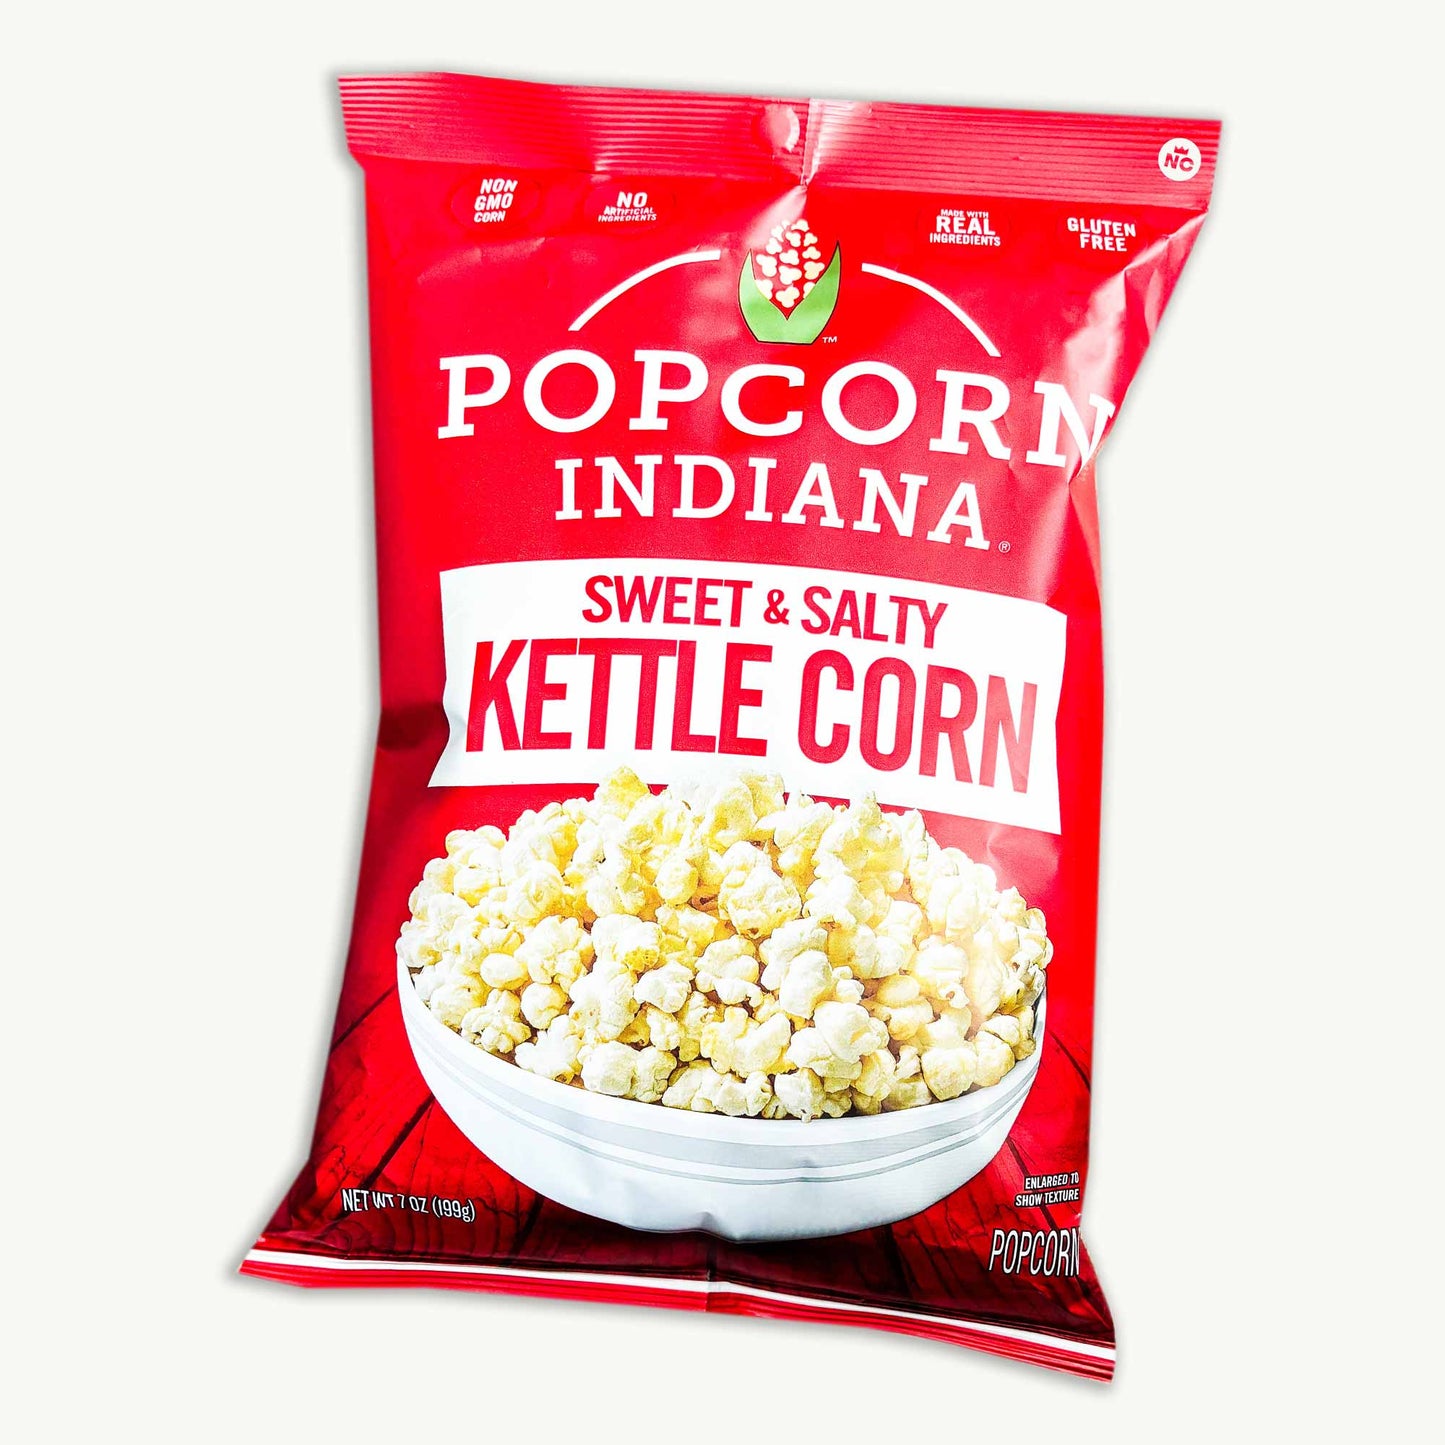 Popcorn Indiana Sweet and Salty Kettle Popcorn 7oz